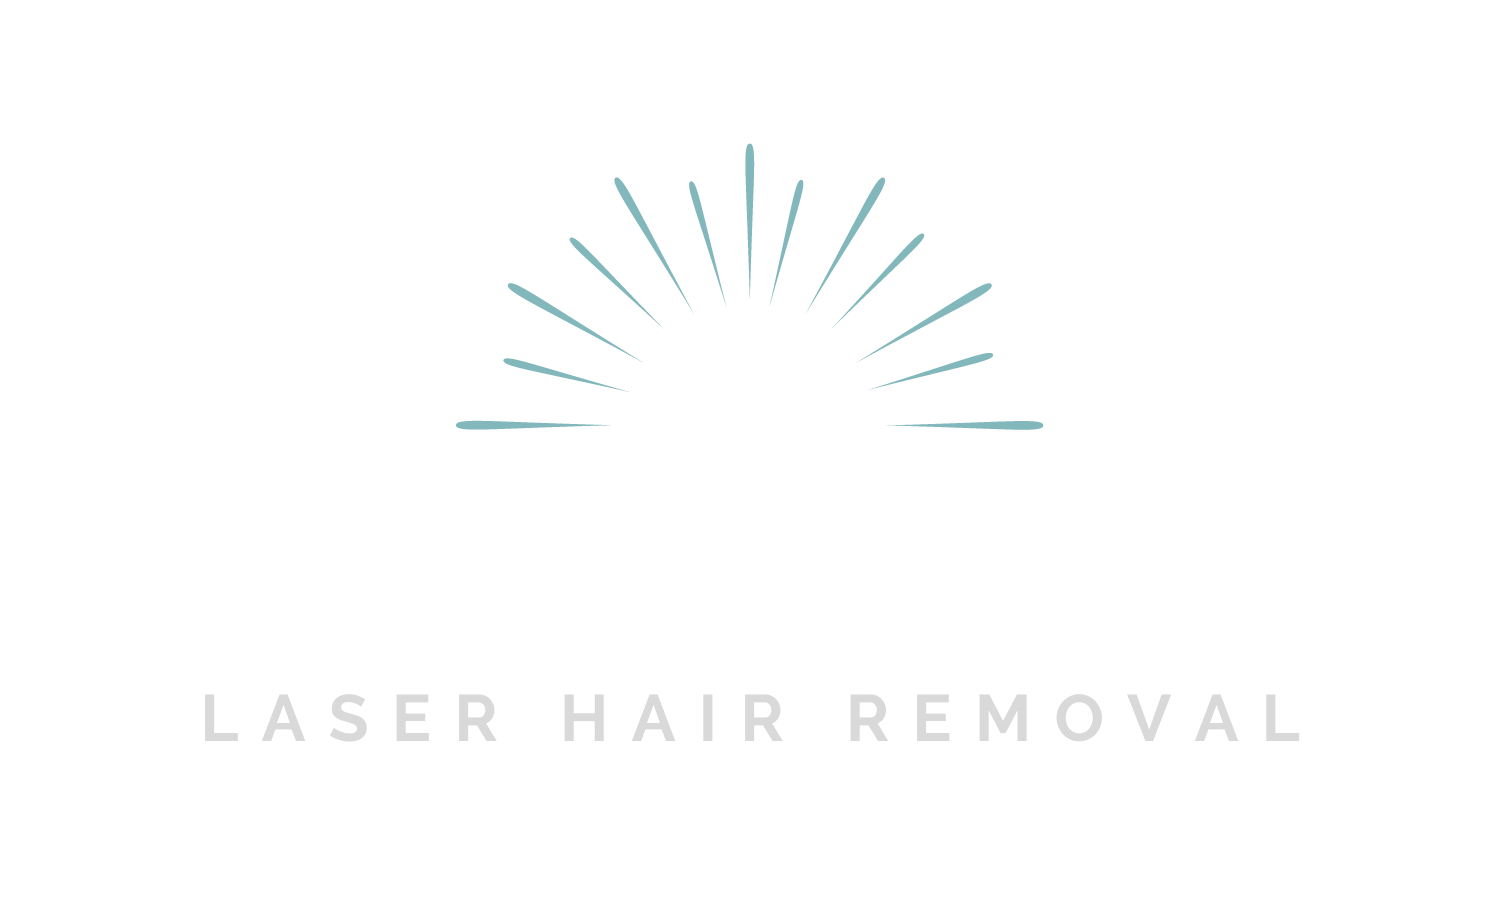 New Image Laser Hair Removal